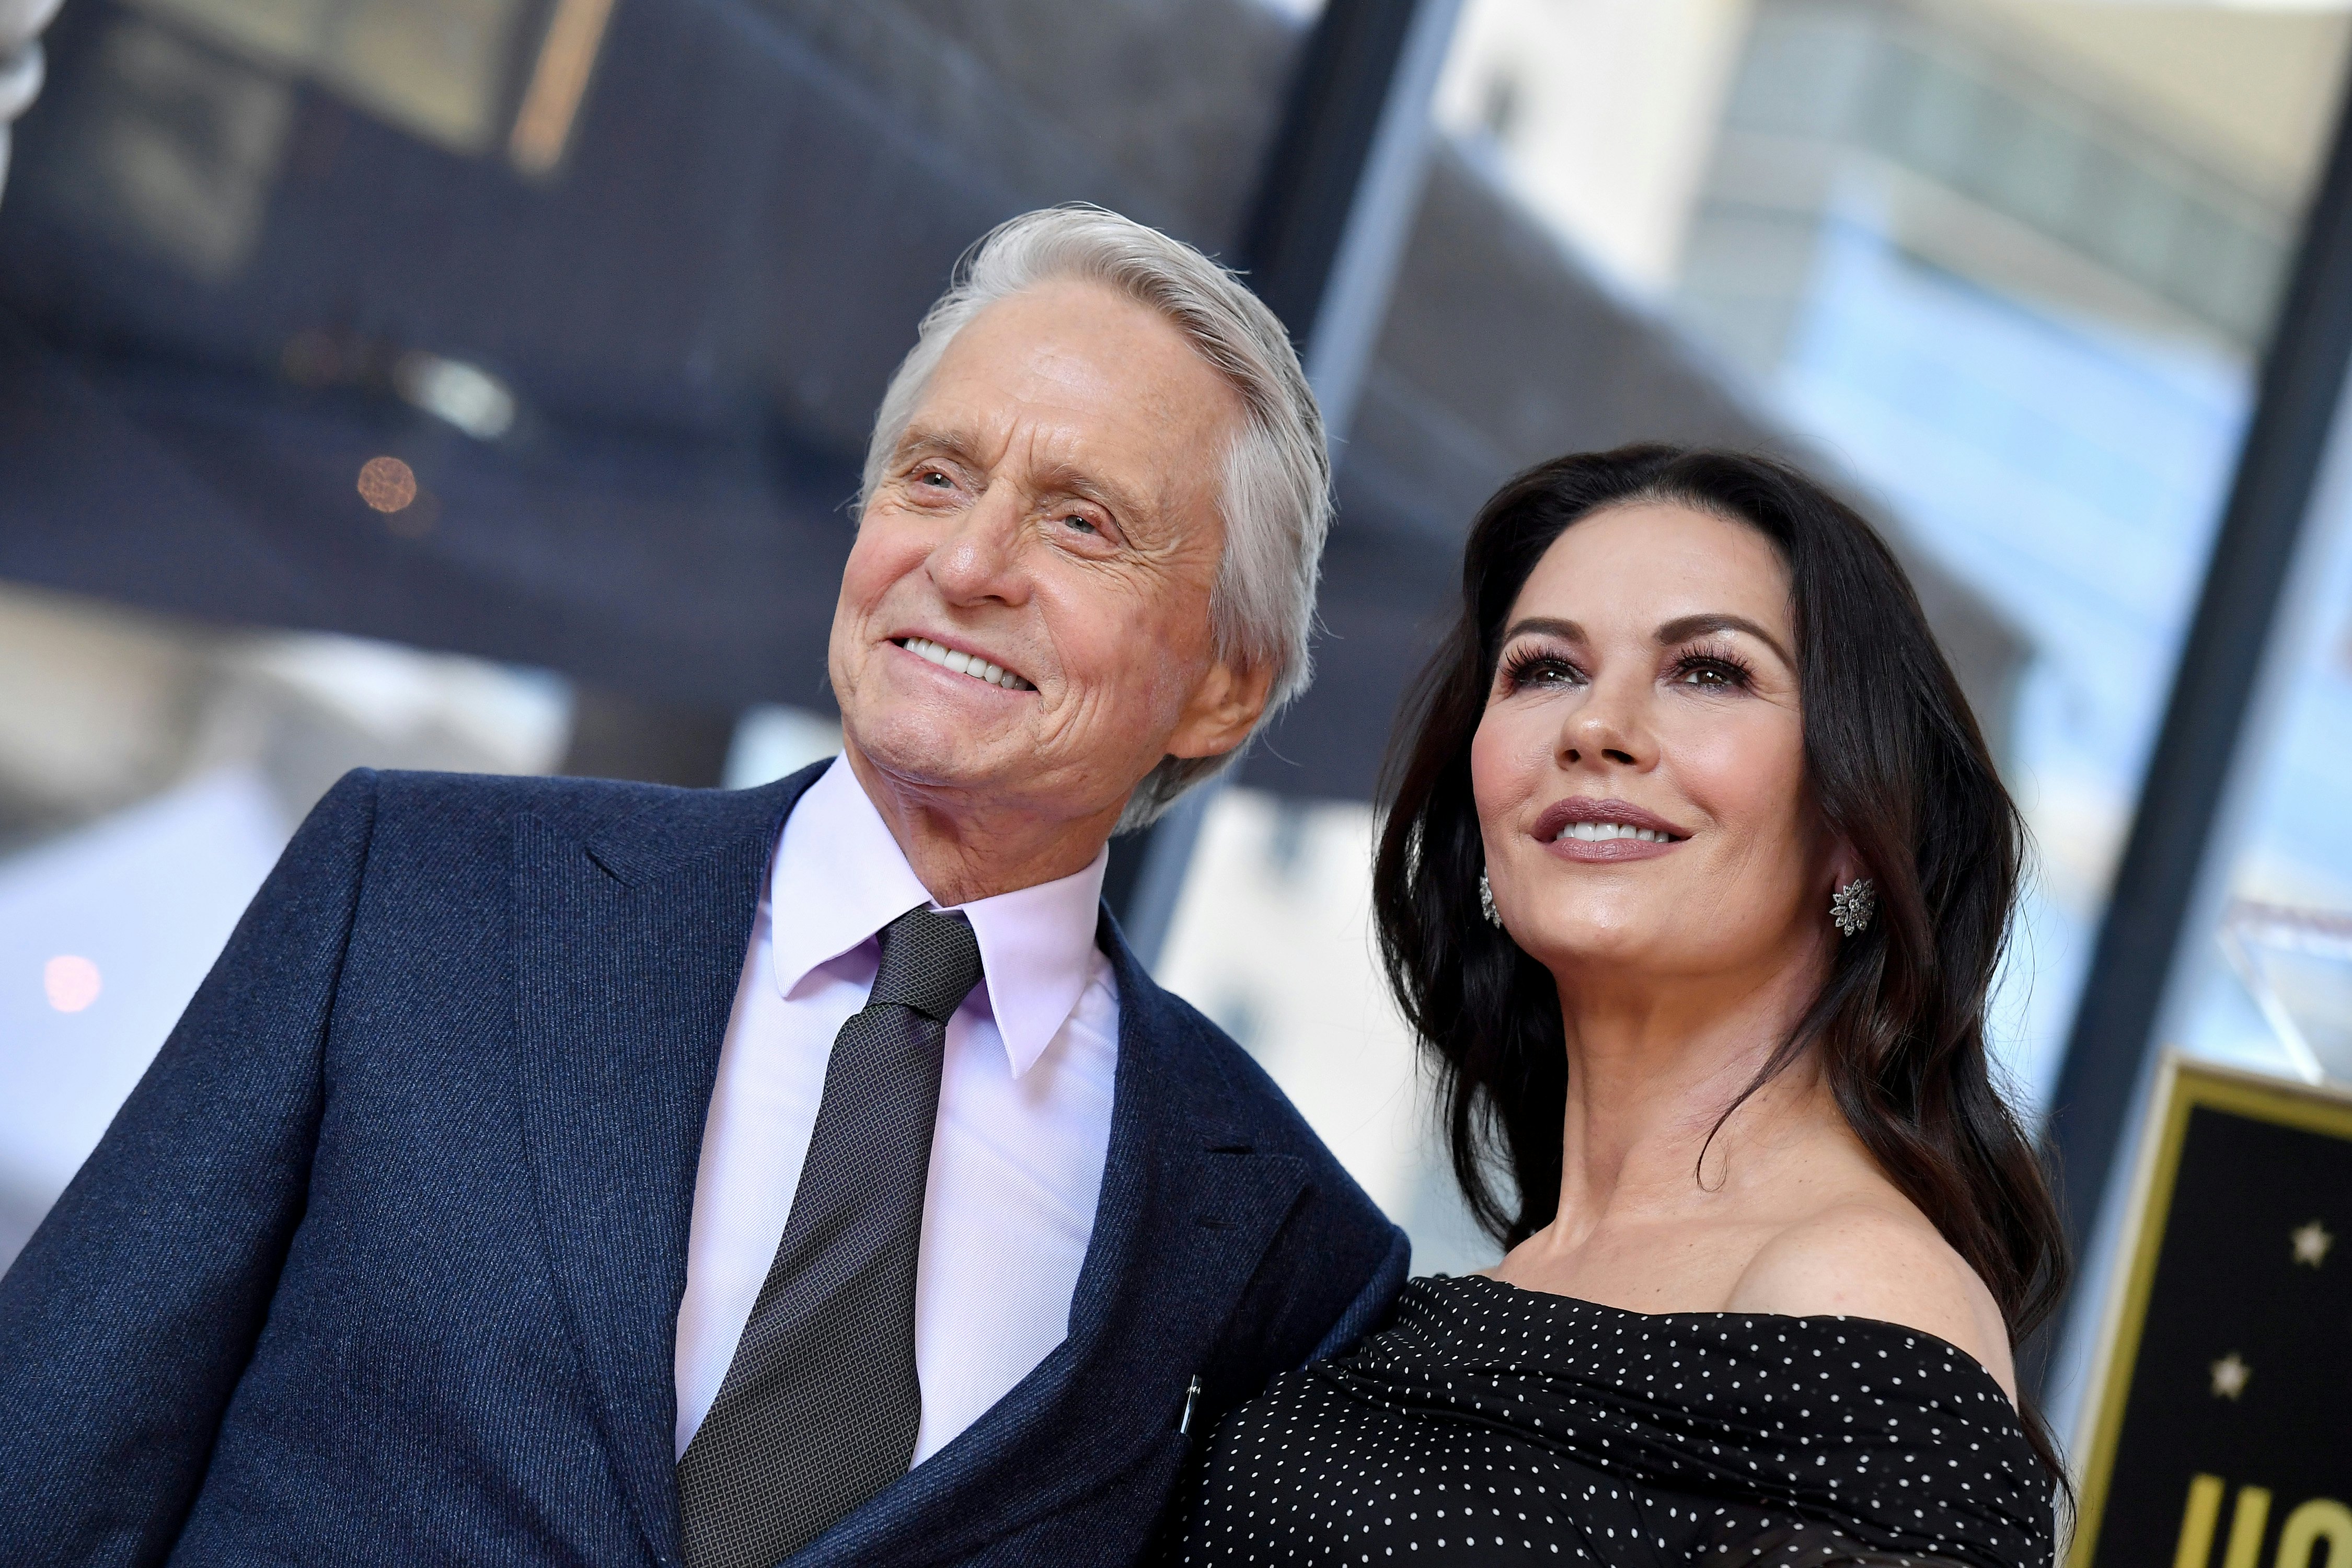 Catherine Zeta-Jones Says She and Michael Douglas Have an “Open Marriage,” Doesnt Mean That Kind of Open Marriage photo